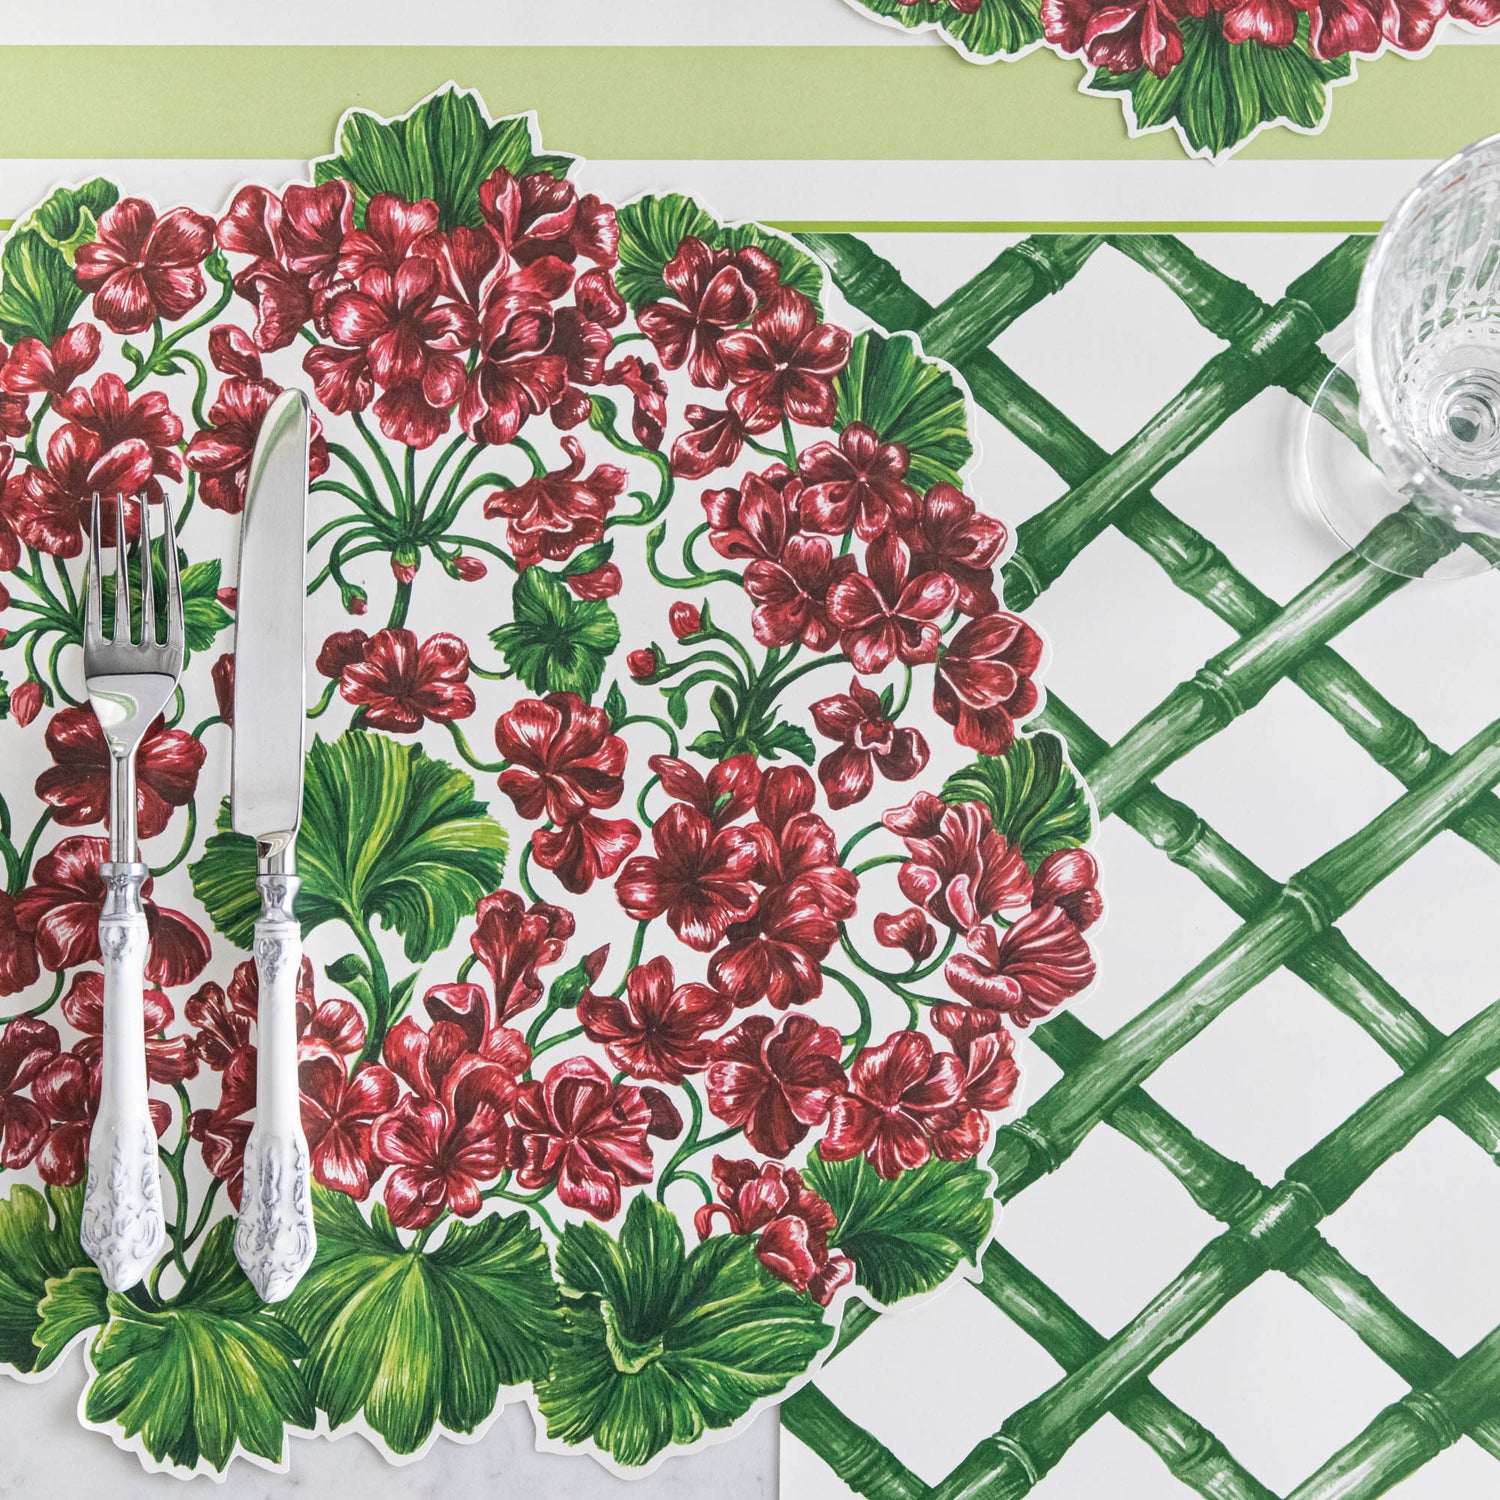 A Green Lattice Placemat with geraniums in a garden setting by Hester &amp; Cook.